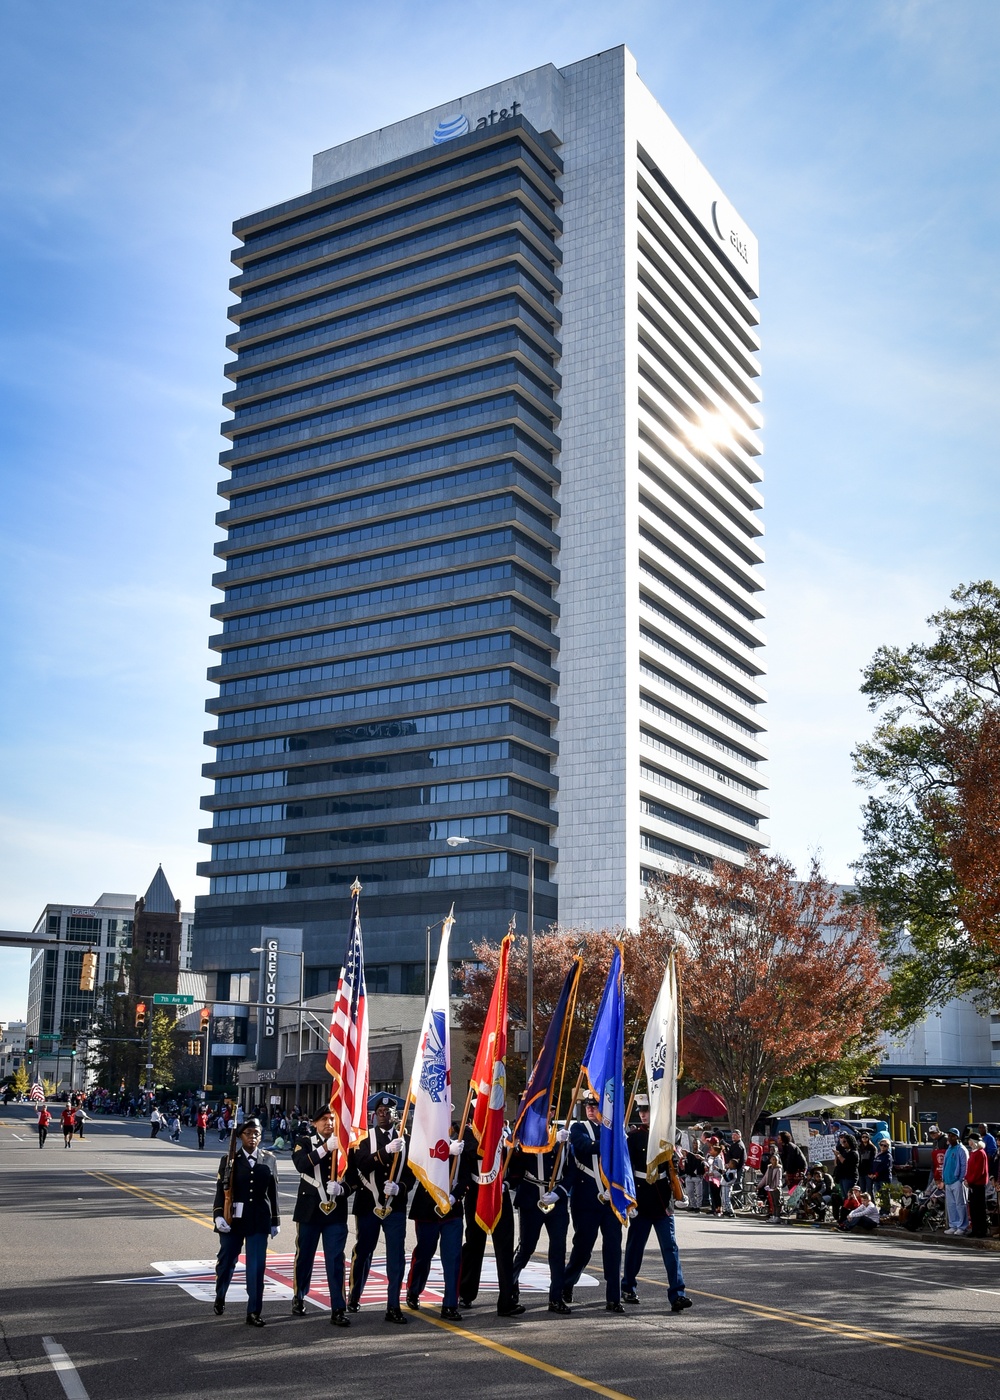 117 ARW March in Veterans Day Parade